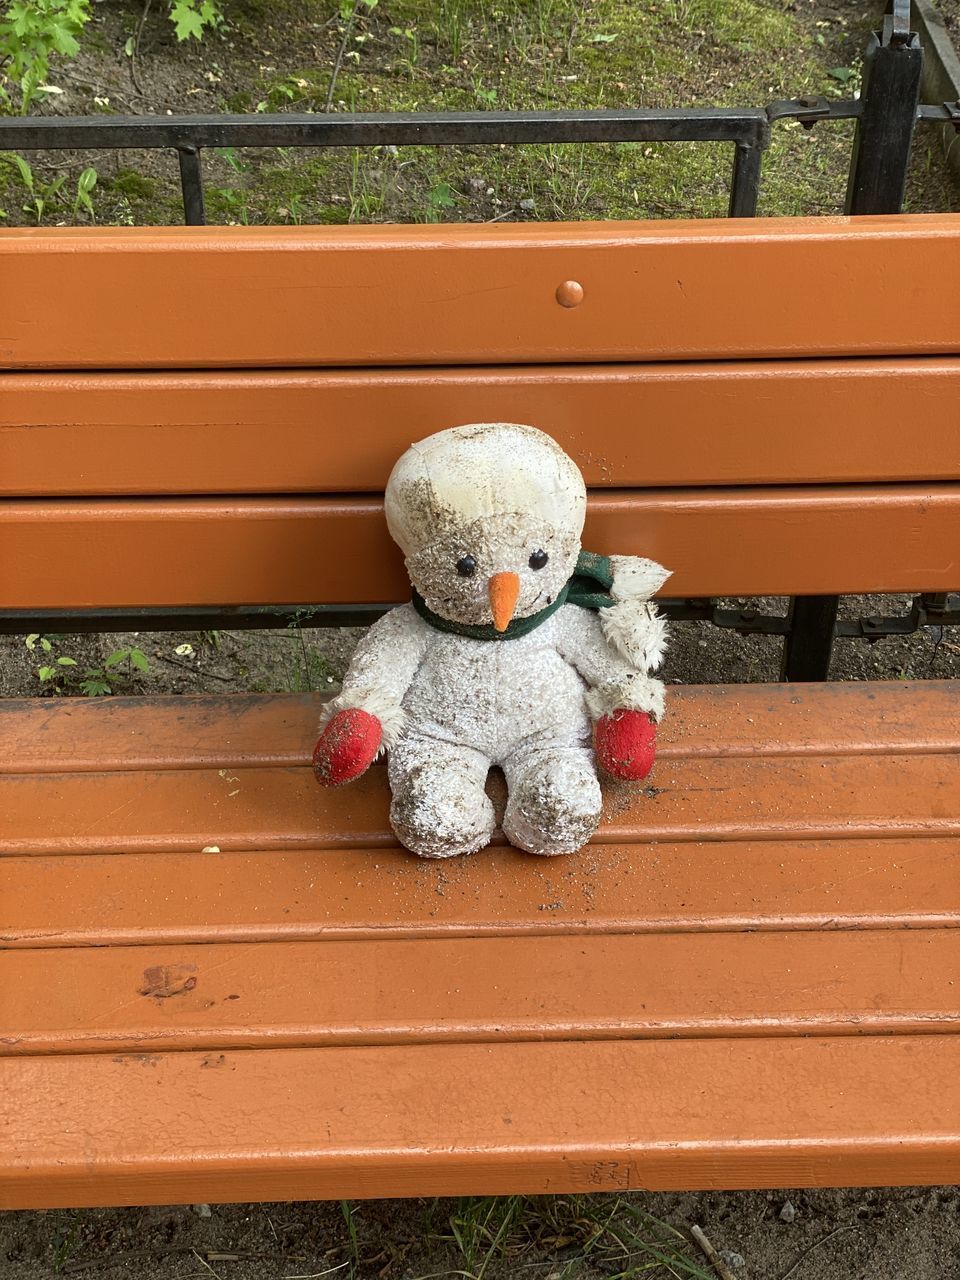 CLOSE-UP OF TOY ON BENCH AT PARK